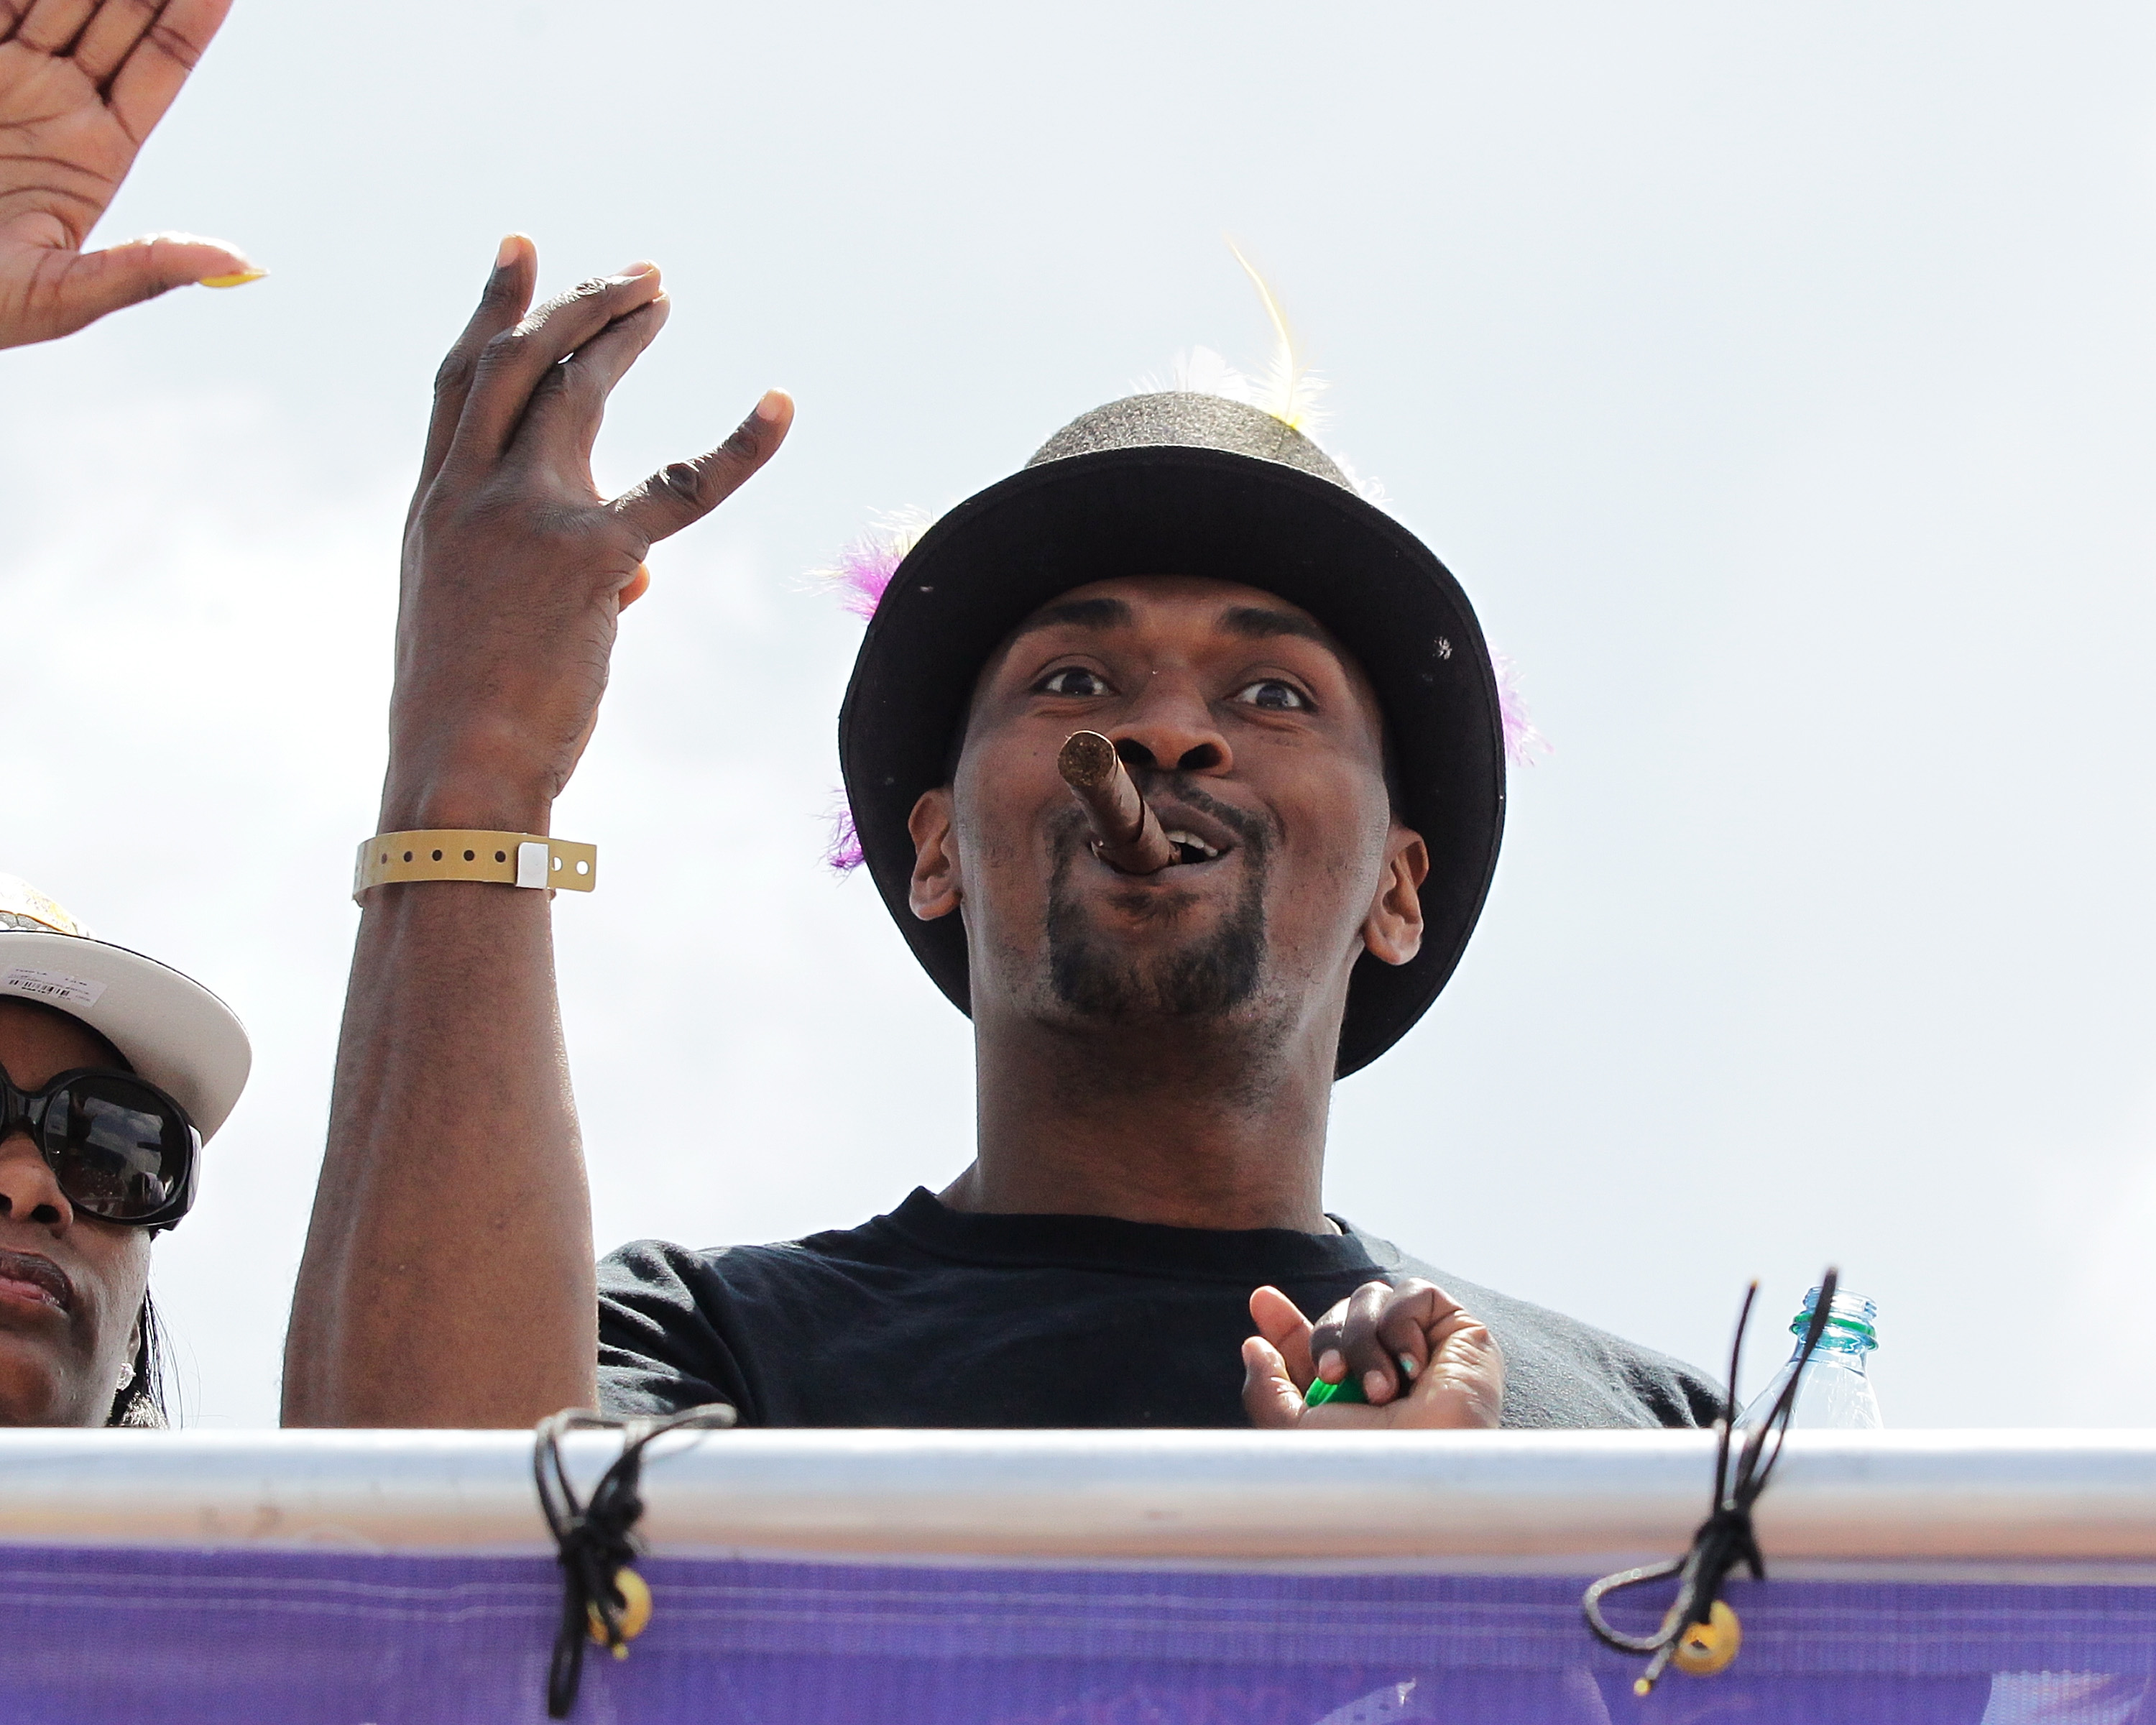 LOS ANGELES, CA - JUNE 21:  Los Angeles Lakers small forward Ron Artest waves to the fans while riding in the victory parade for the the NBA basketball champion team on June 21, 2010 in Los Angeles, California. The Lakers beat the Boston Celtics 87-79 in